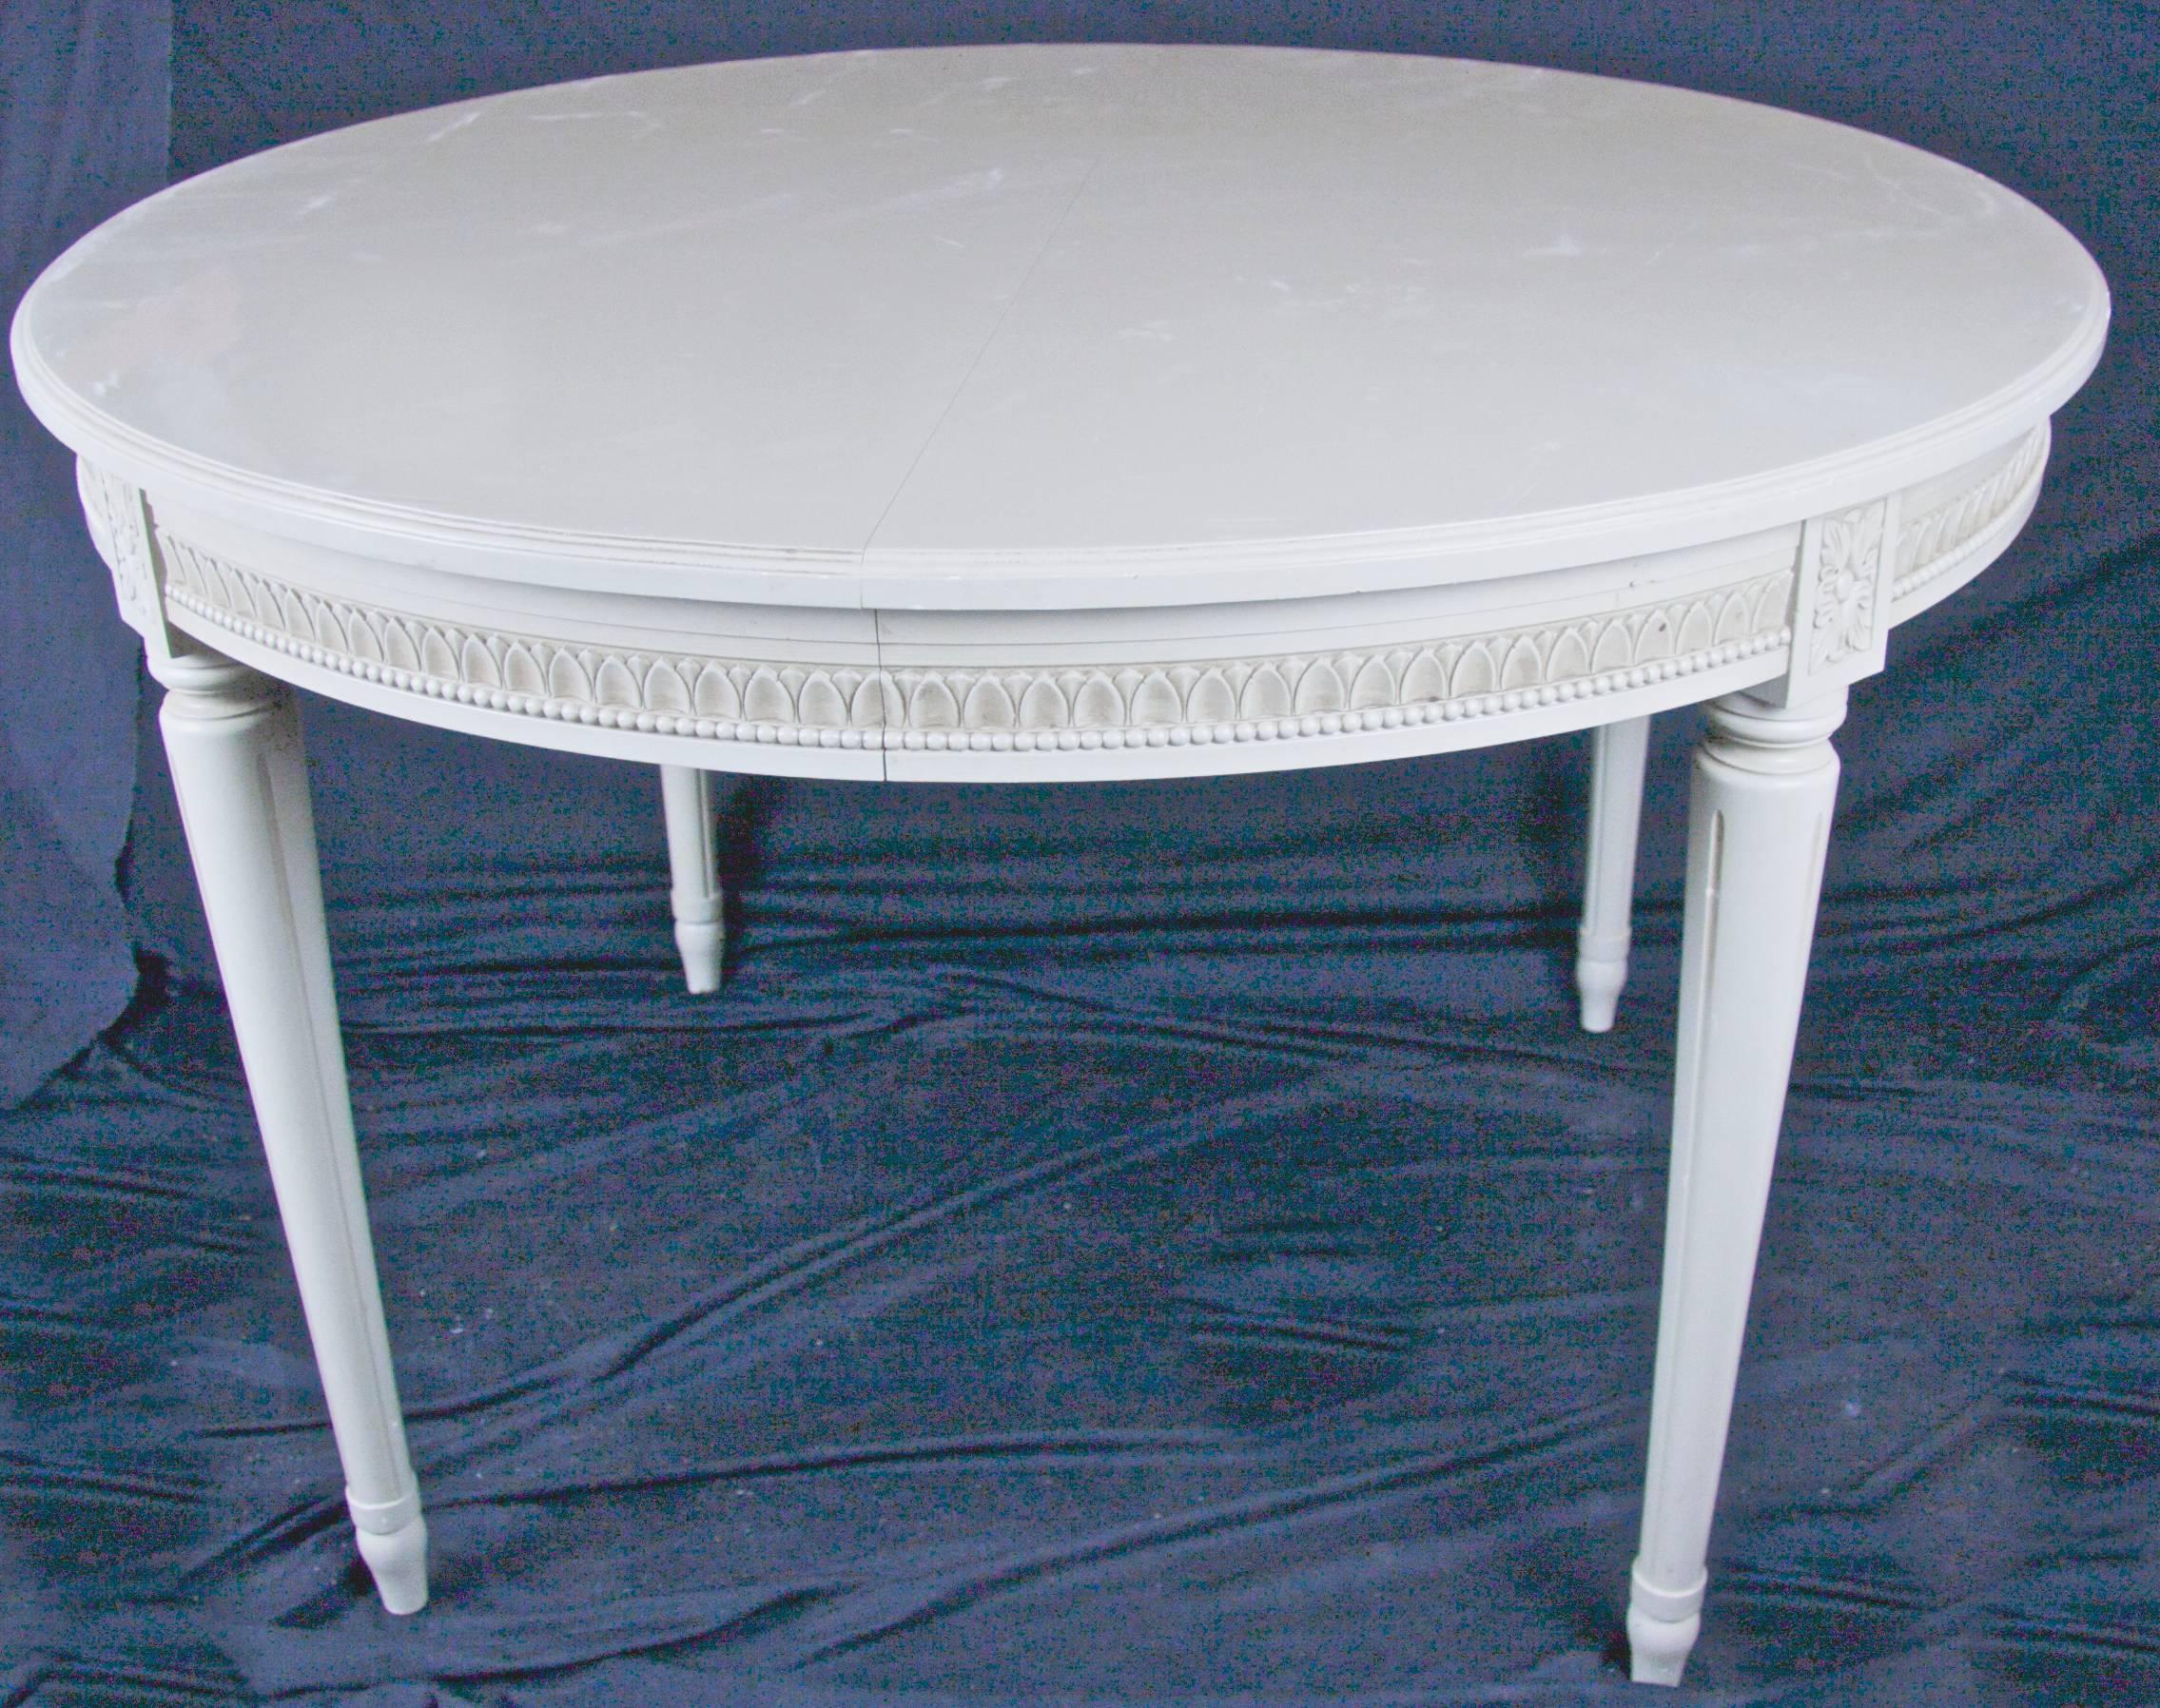 Birch Swedish Gustavian Extendable Dining Table Swedish, White , Early 20th Century